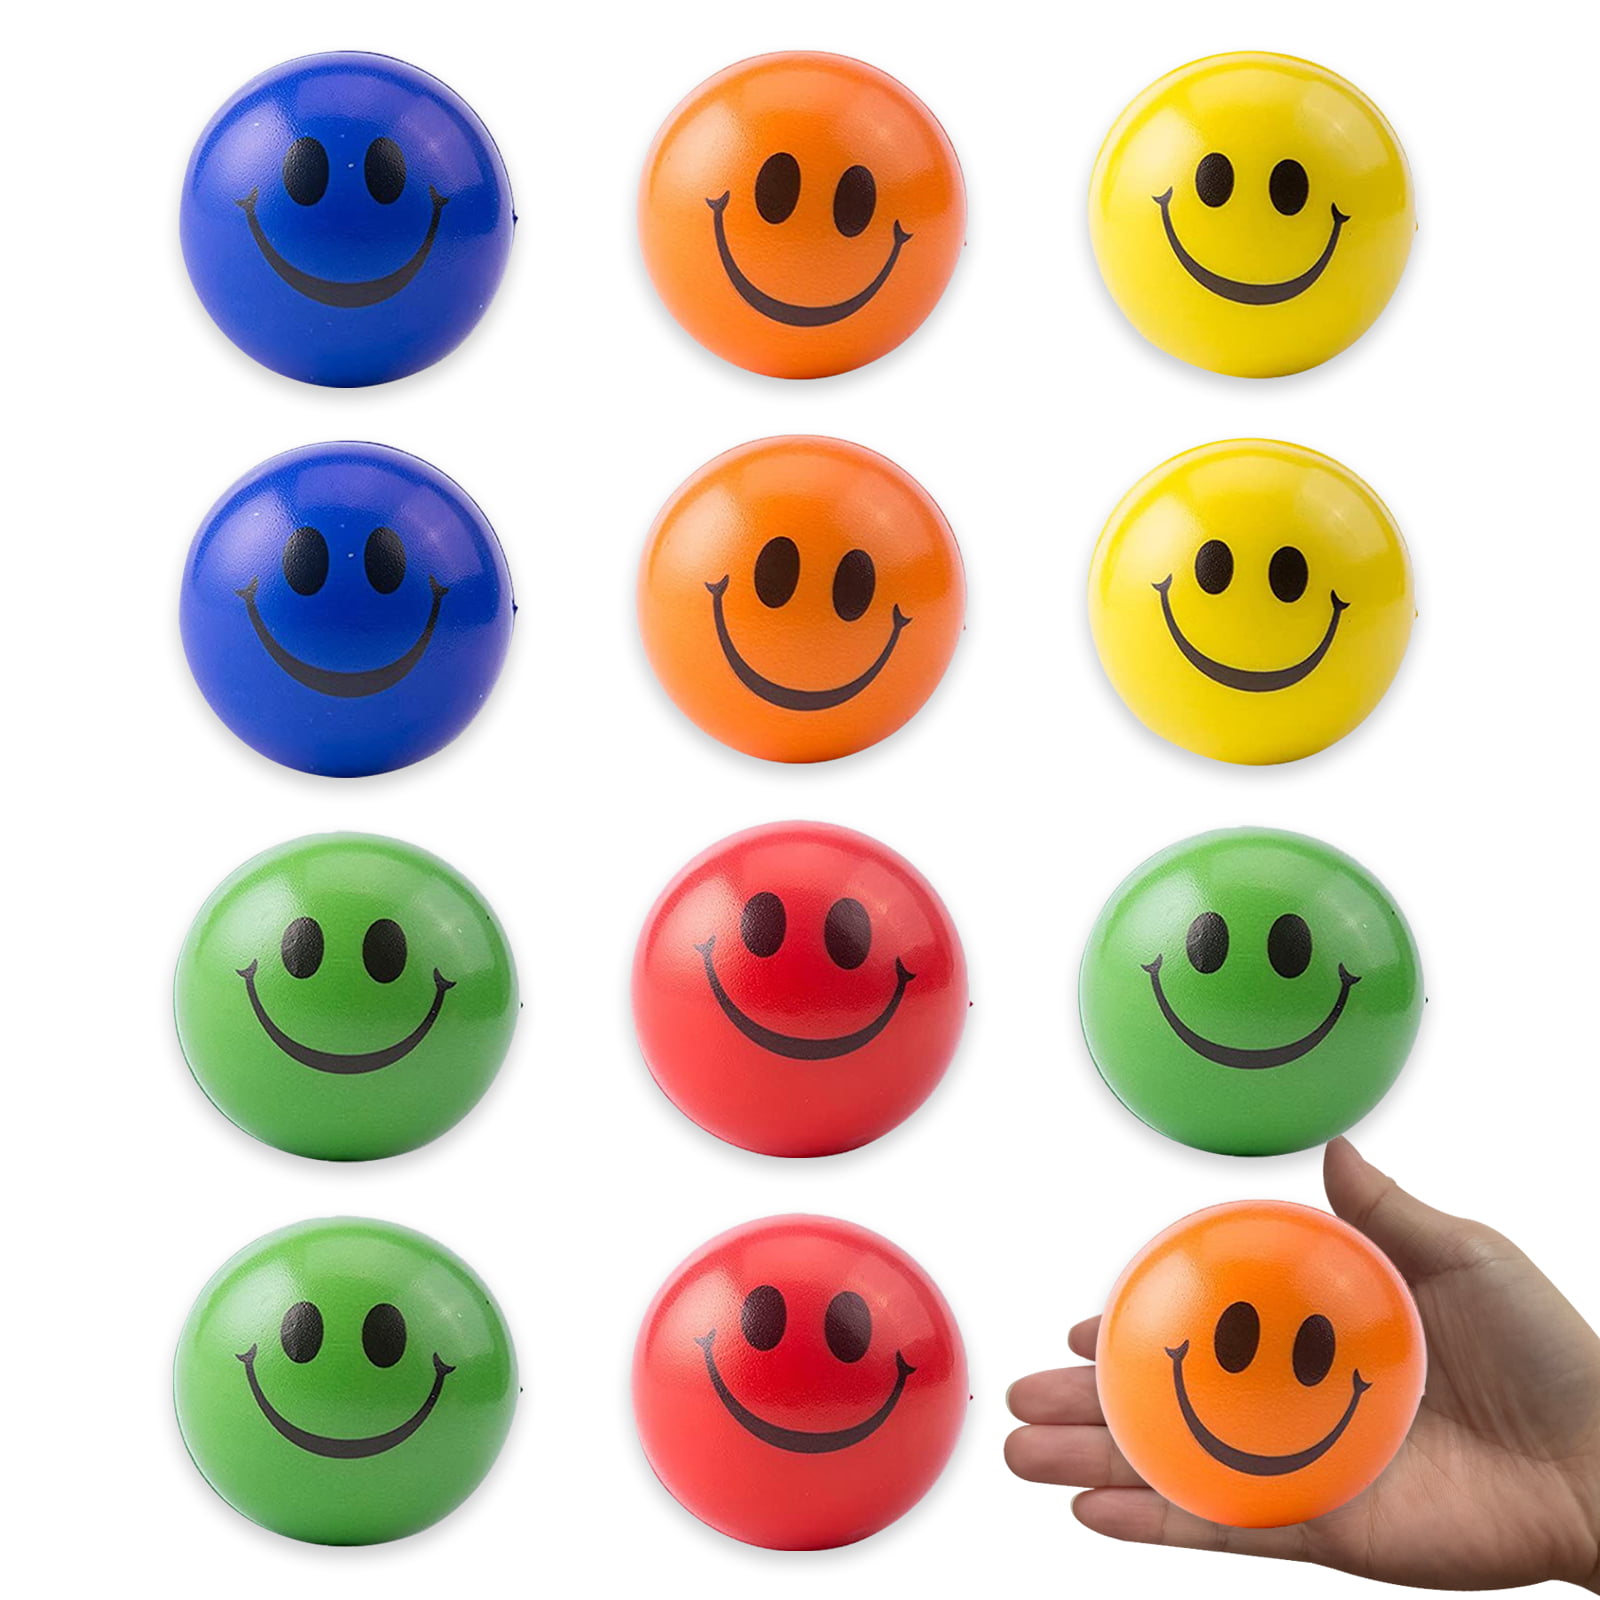 4 Big Funny Squeeze Balls Toys Faces Wrist Finger Exercise Stress Relief Therapy 